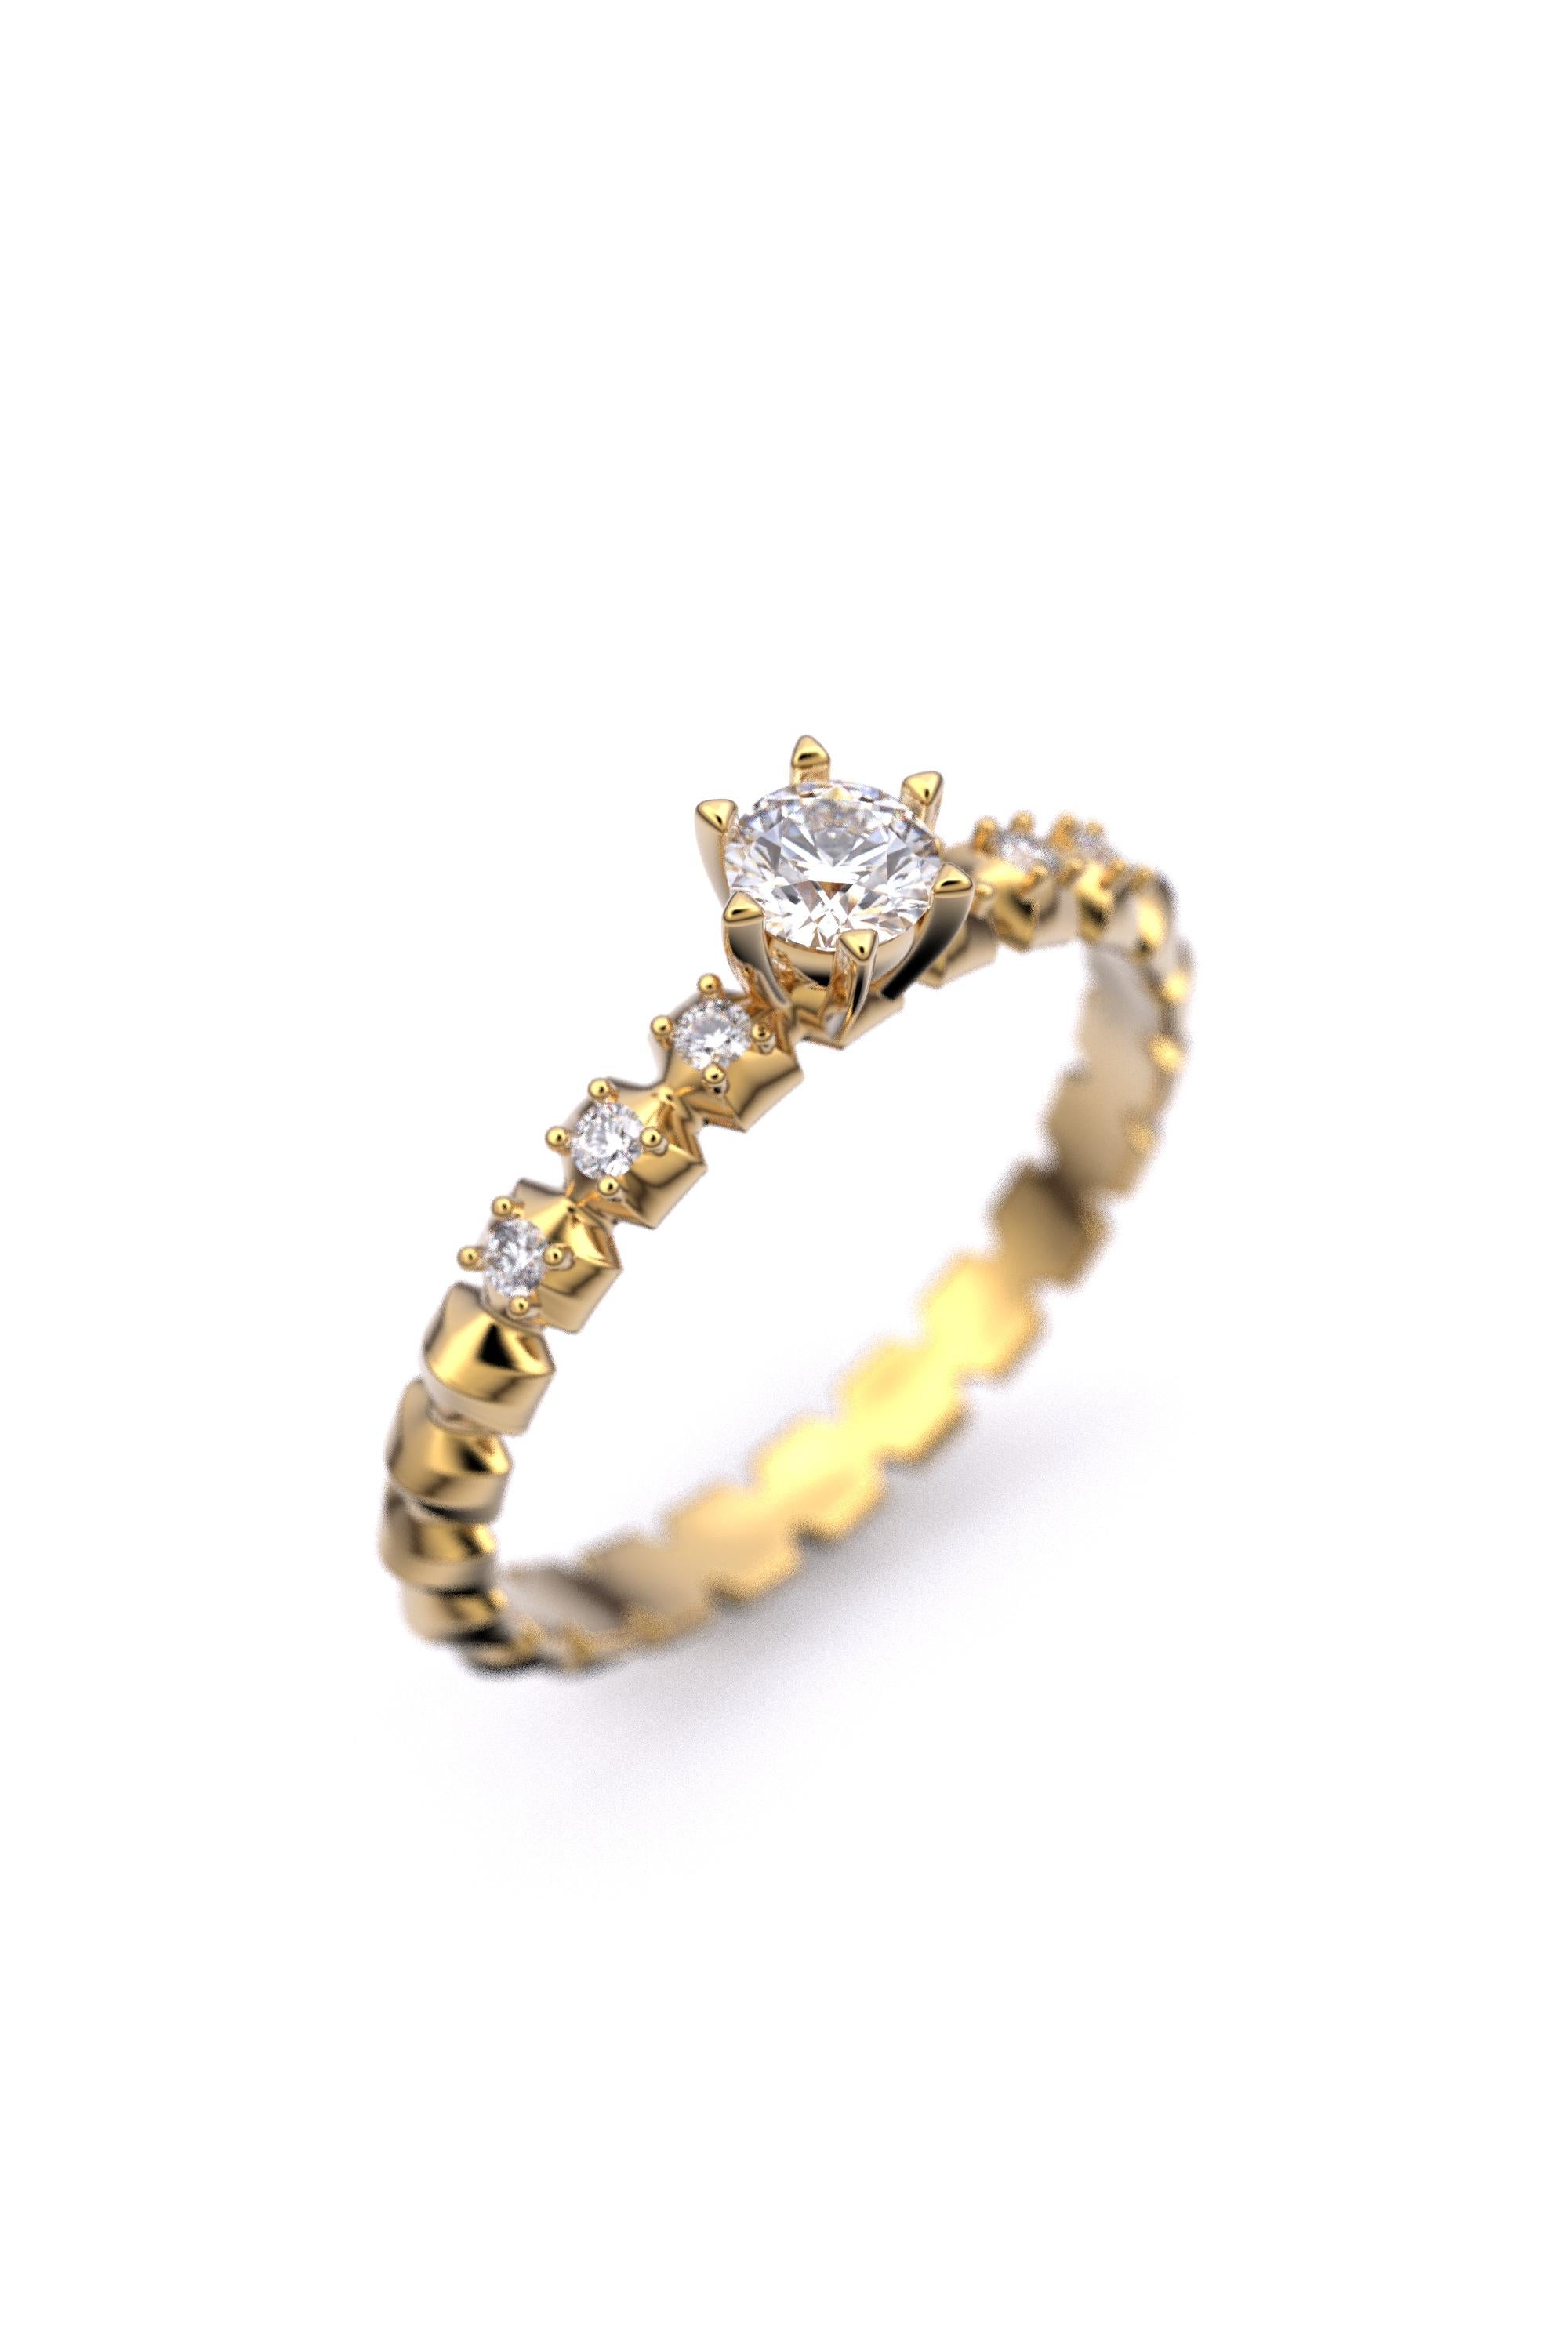 For Sale:  Italian-Made 0.32 Carat Diamond Engagement Ring in 18k Solid Gold 12